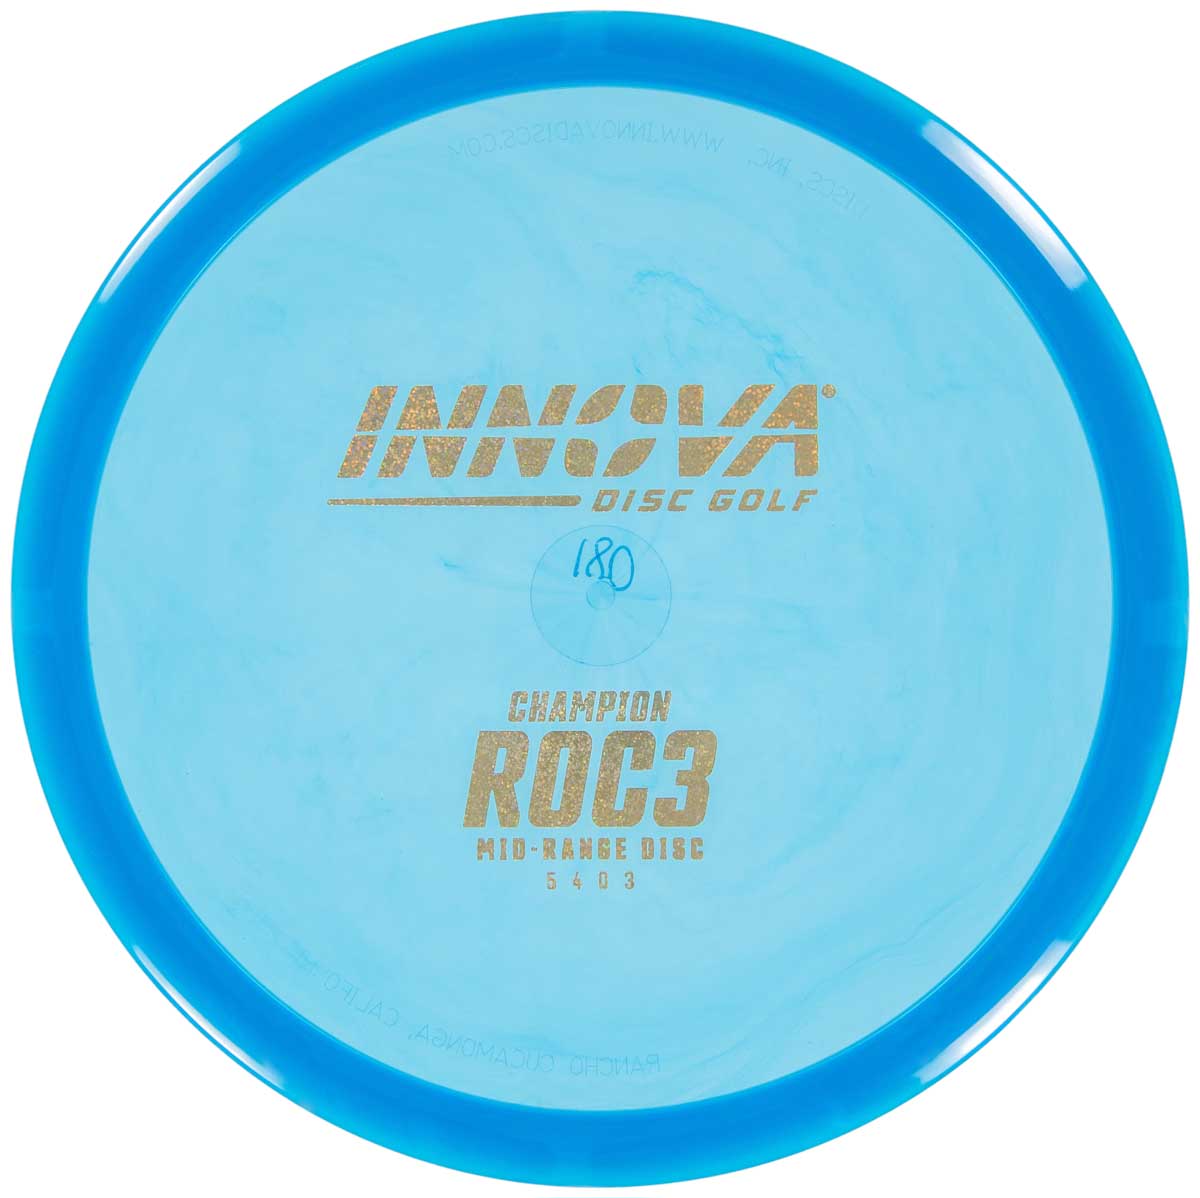 Champion Roc3 from Disc Golf United